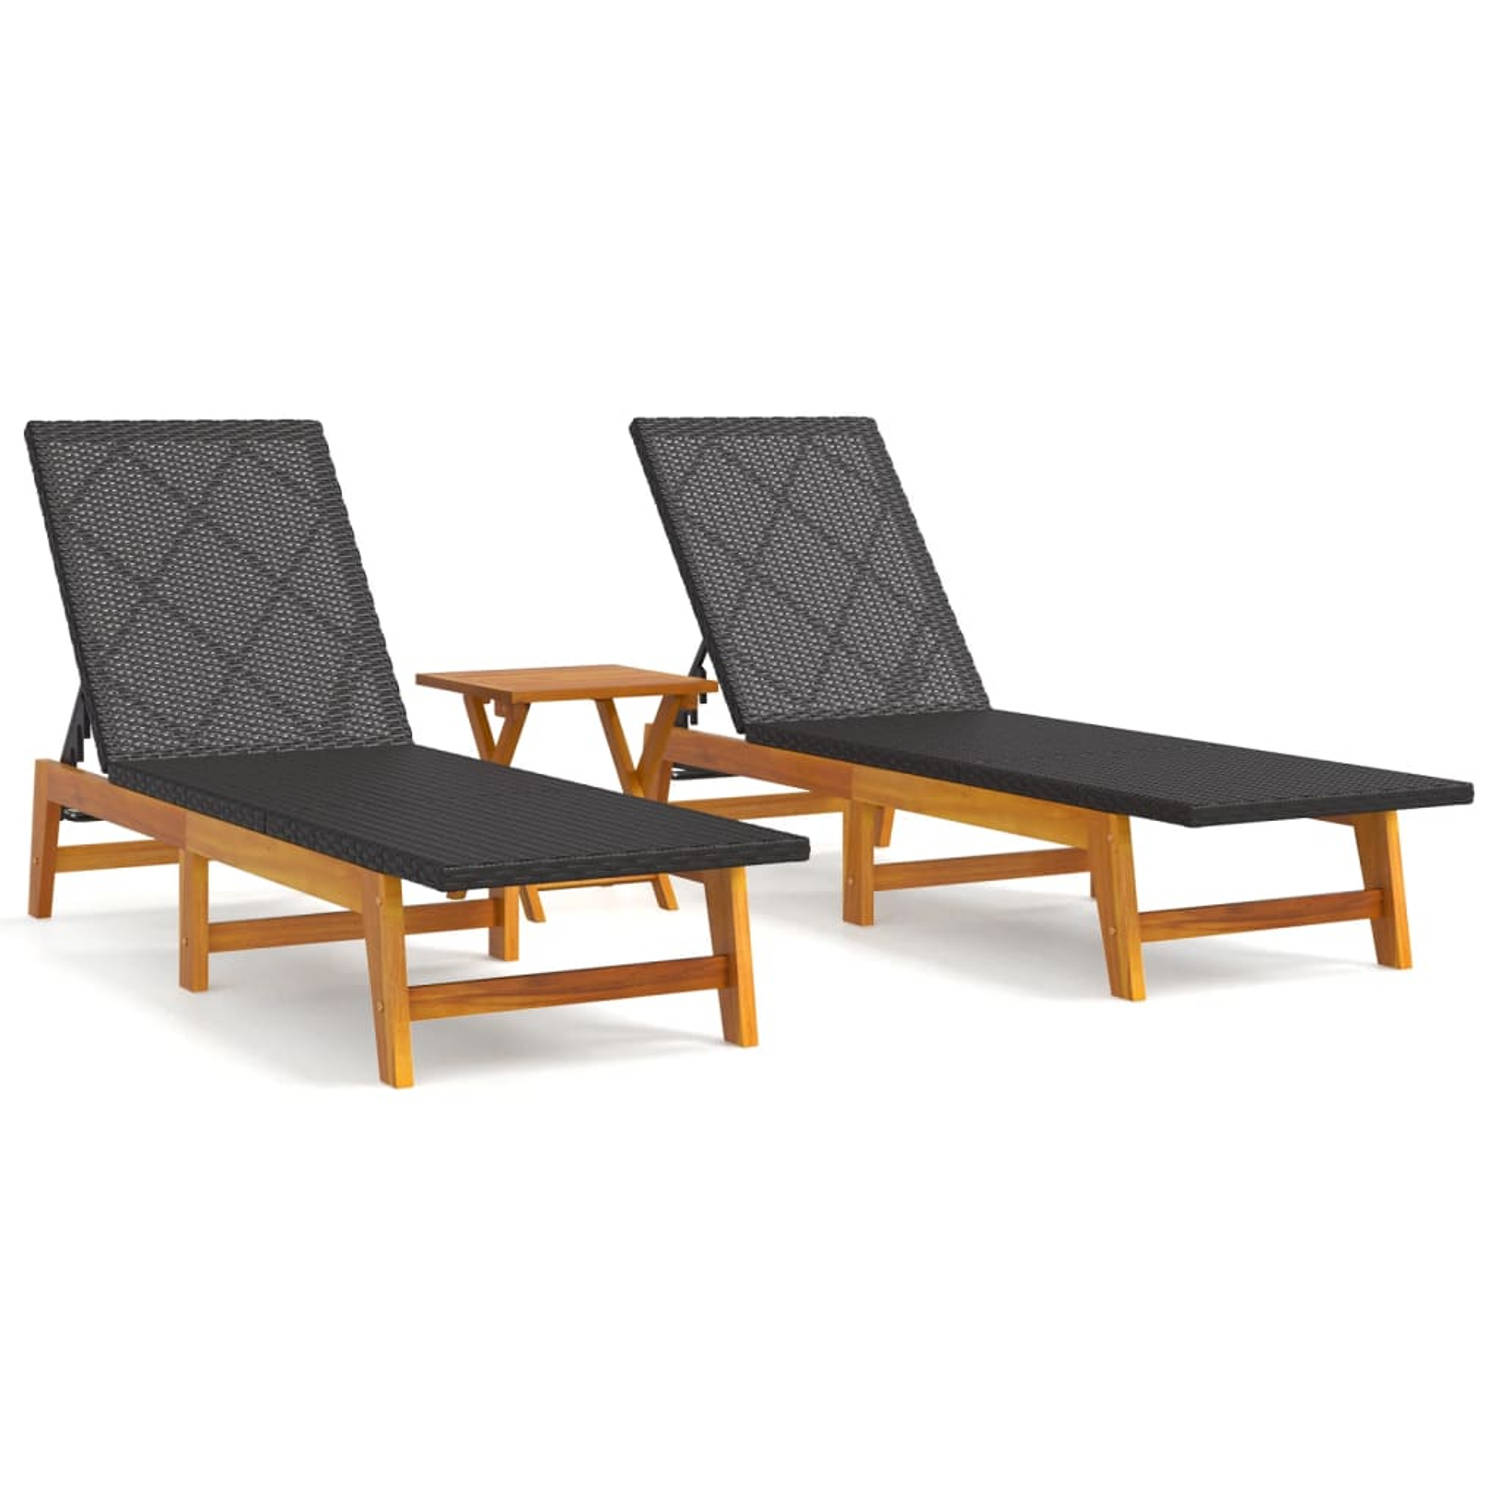 The Living Store 3-delige Loungeset poly rattan en massief acaciahout - Ligbed